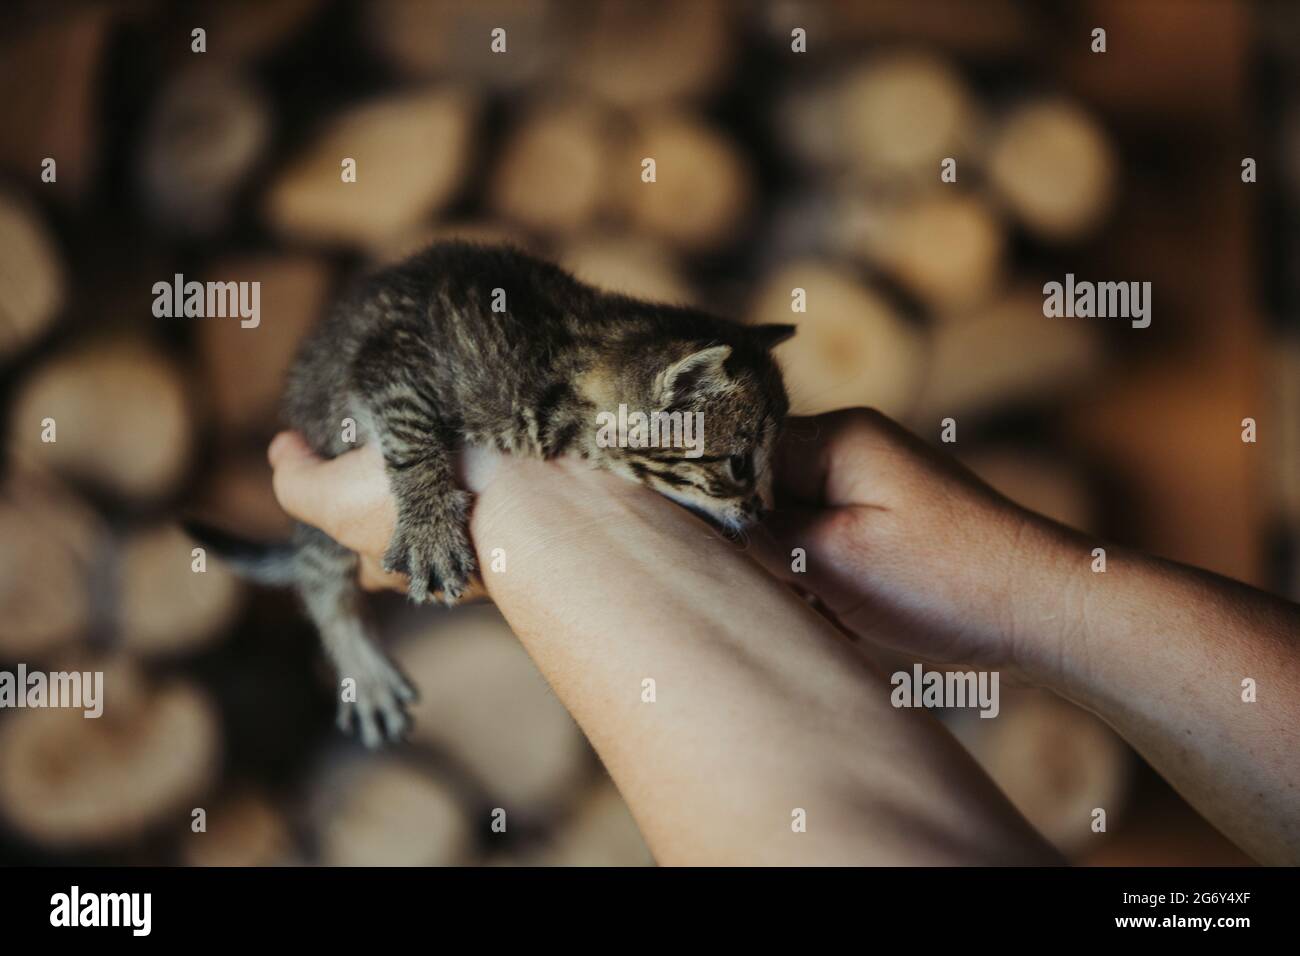 Closeup of a person holding an adorable fluffy small striped  kitten Stock Photo